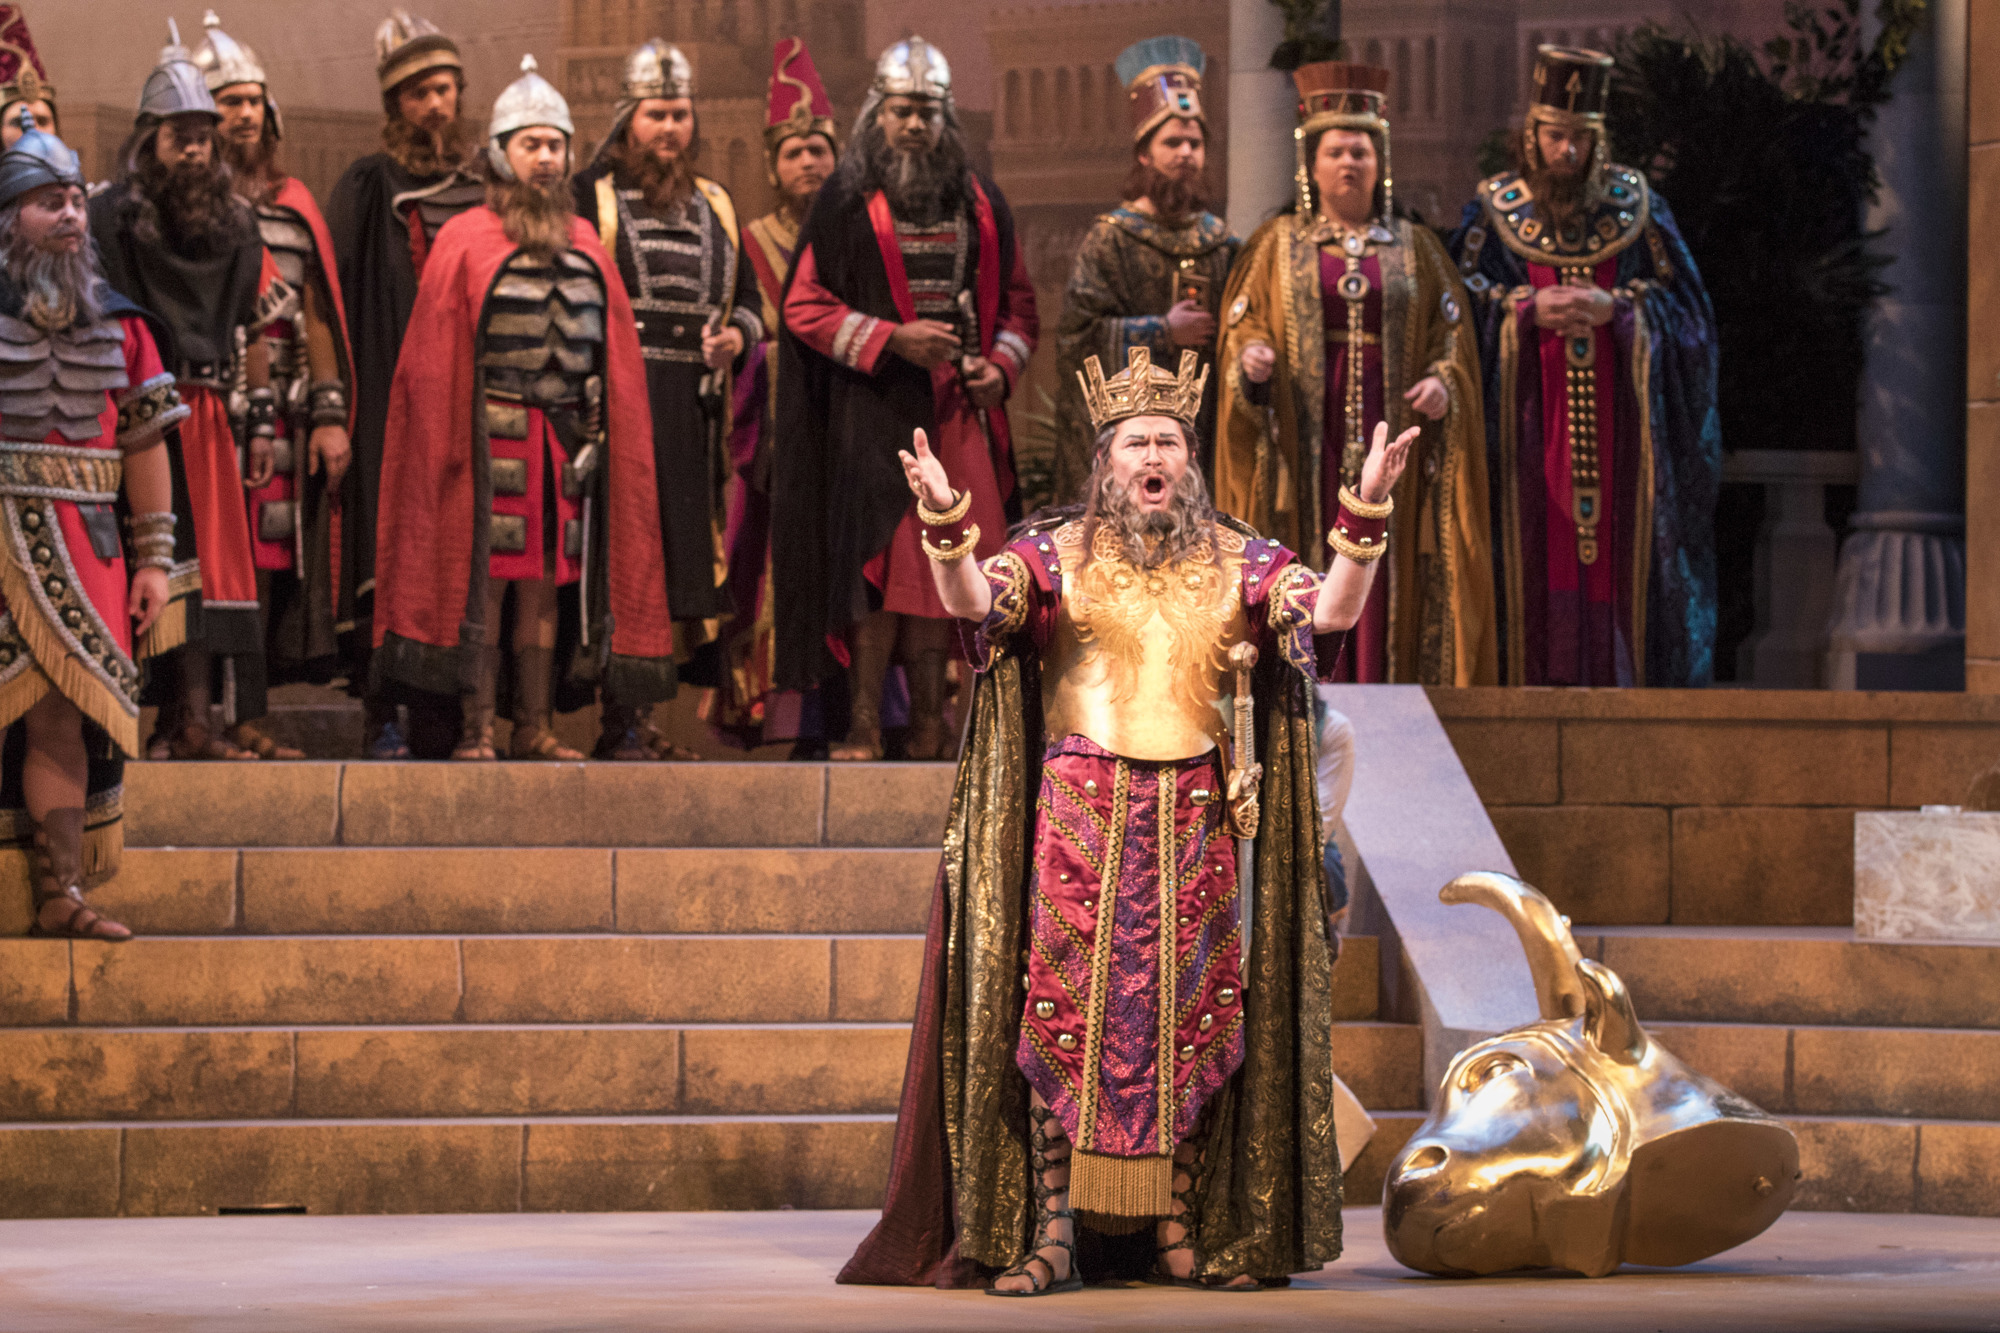 Stephen Gaertner, a former apprentice, returned to perform with the Sarasota Opera in Nabucco in 2019 and is coming back again this season for 